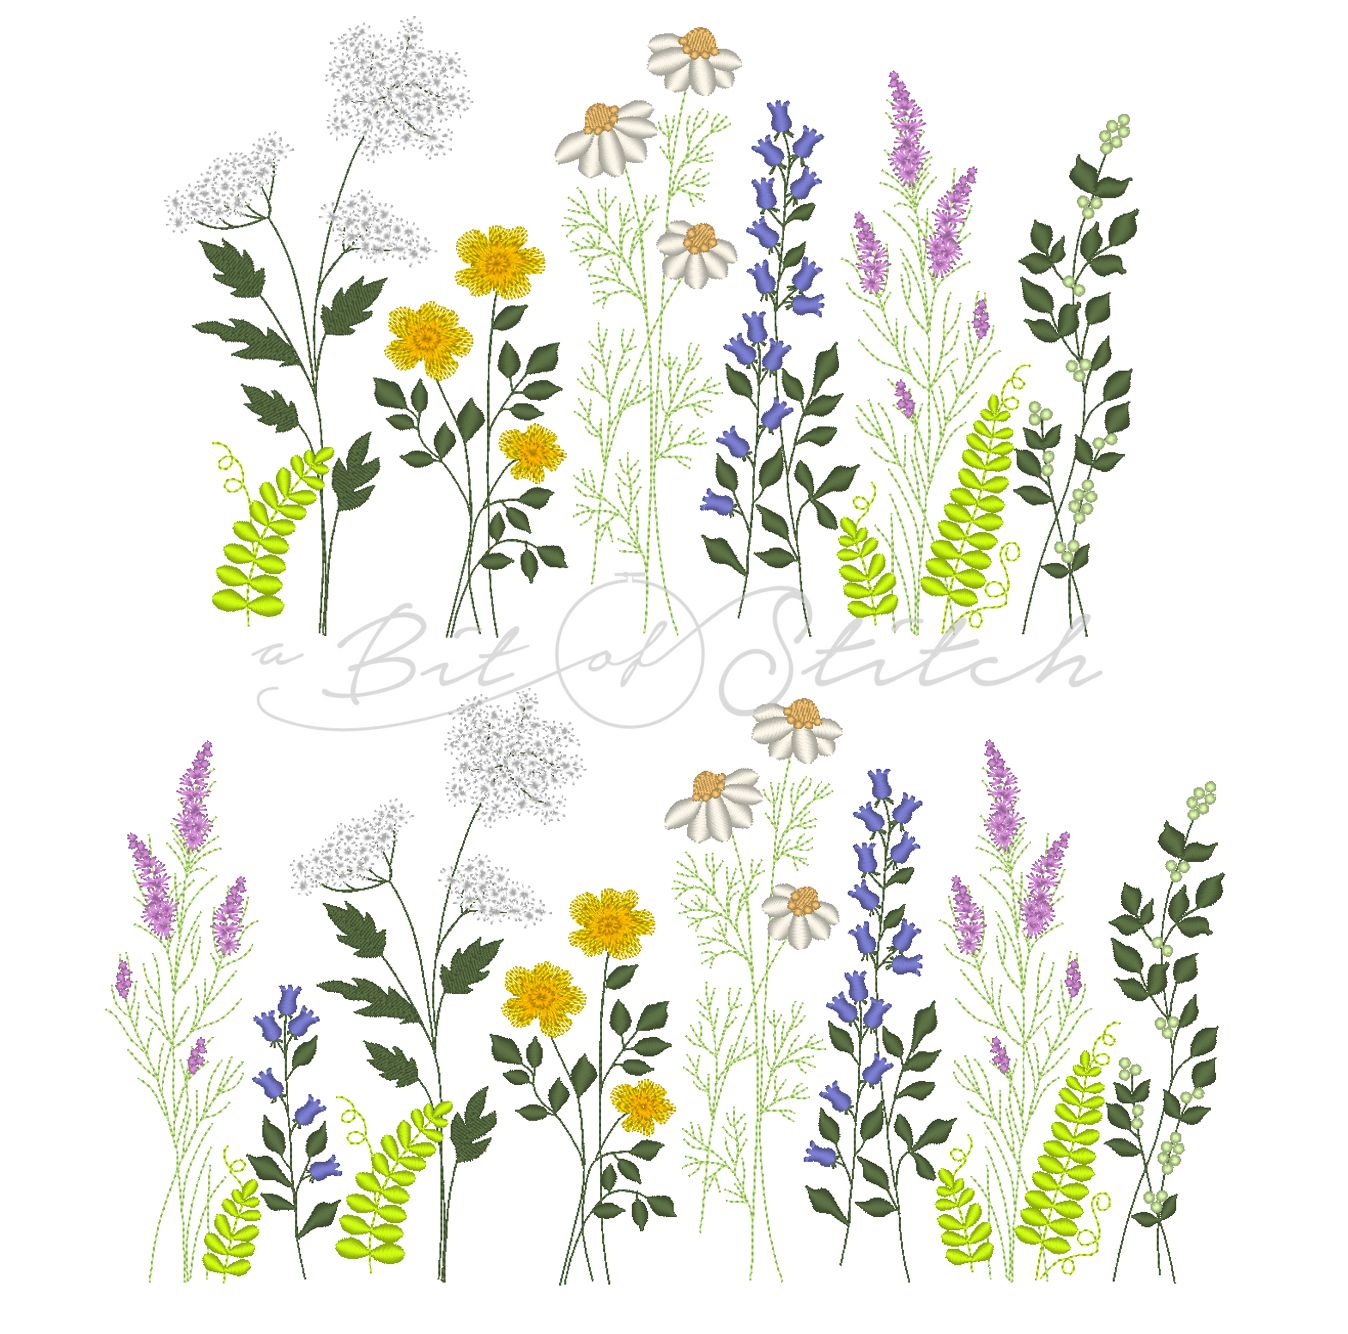 Meadow Flowers wildflower floral machine embroidery designs by A Bit of Stitch